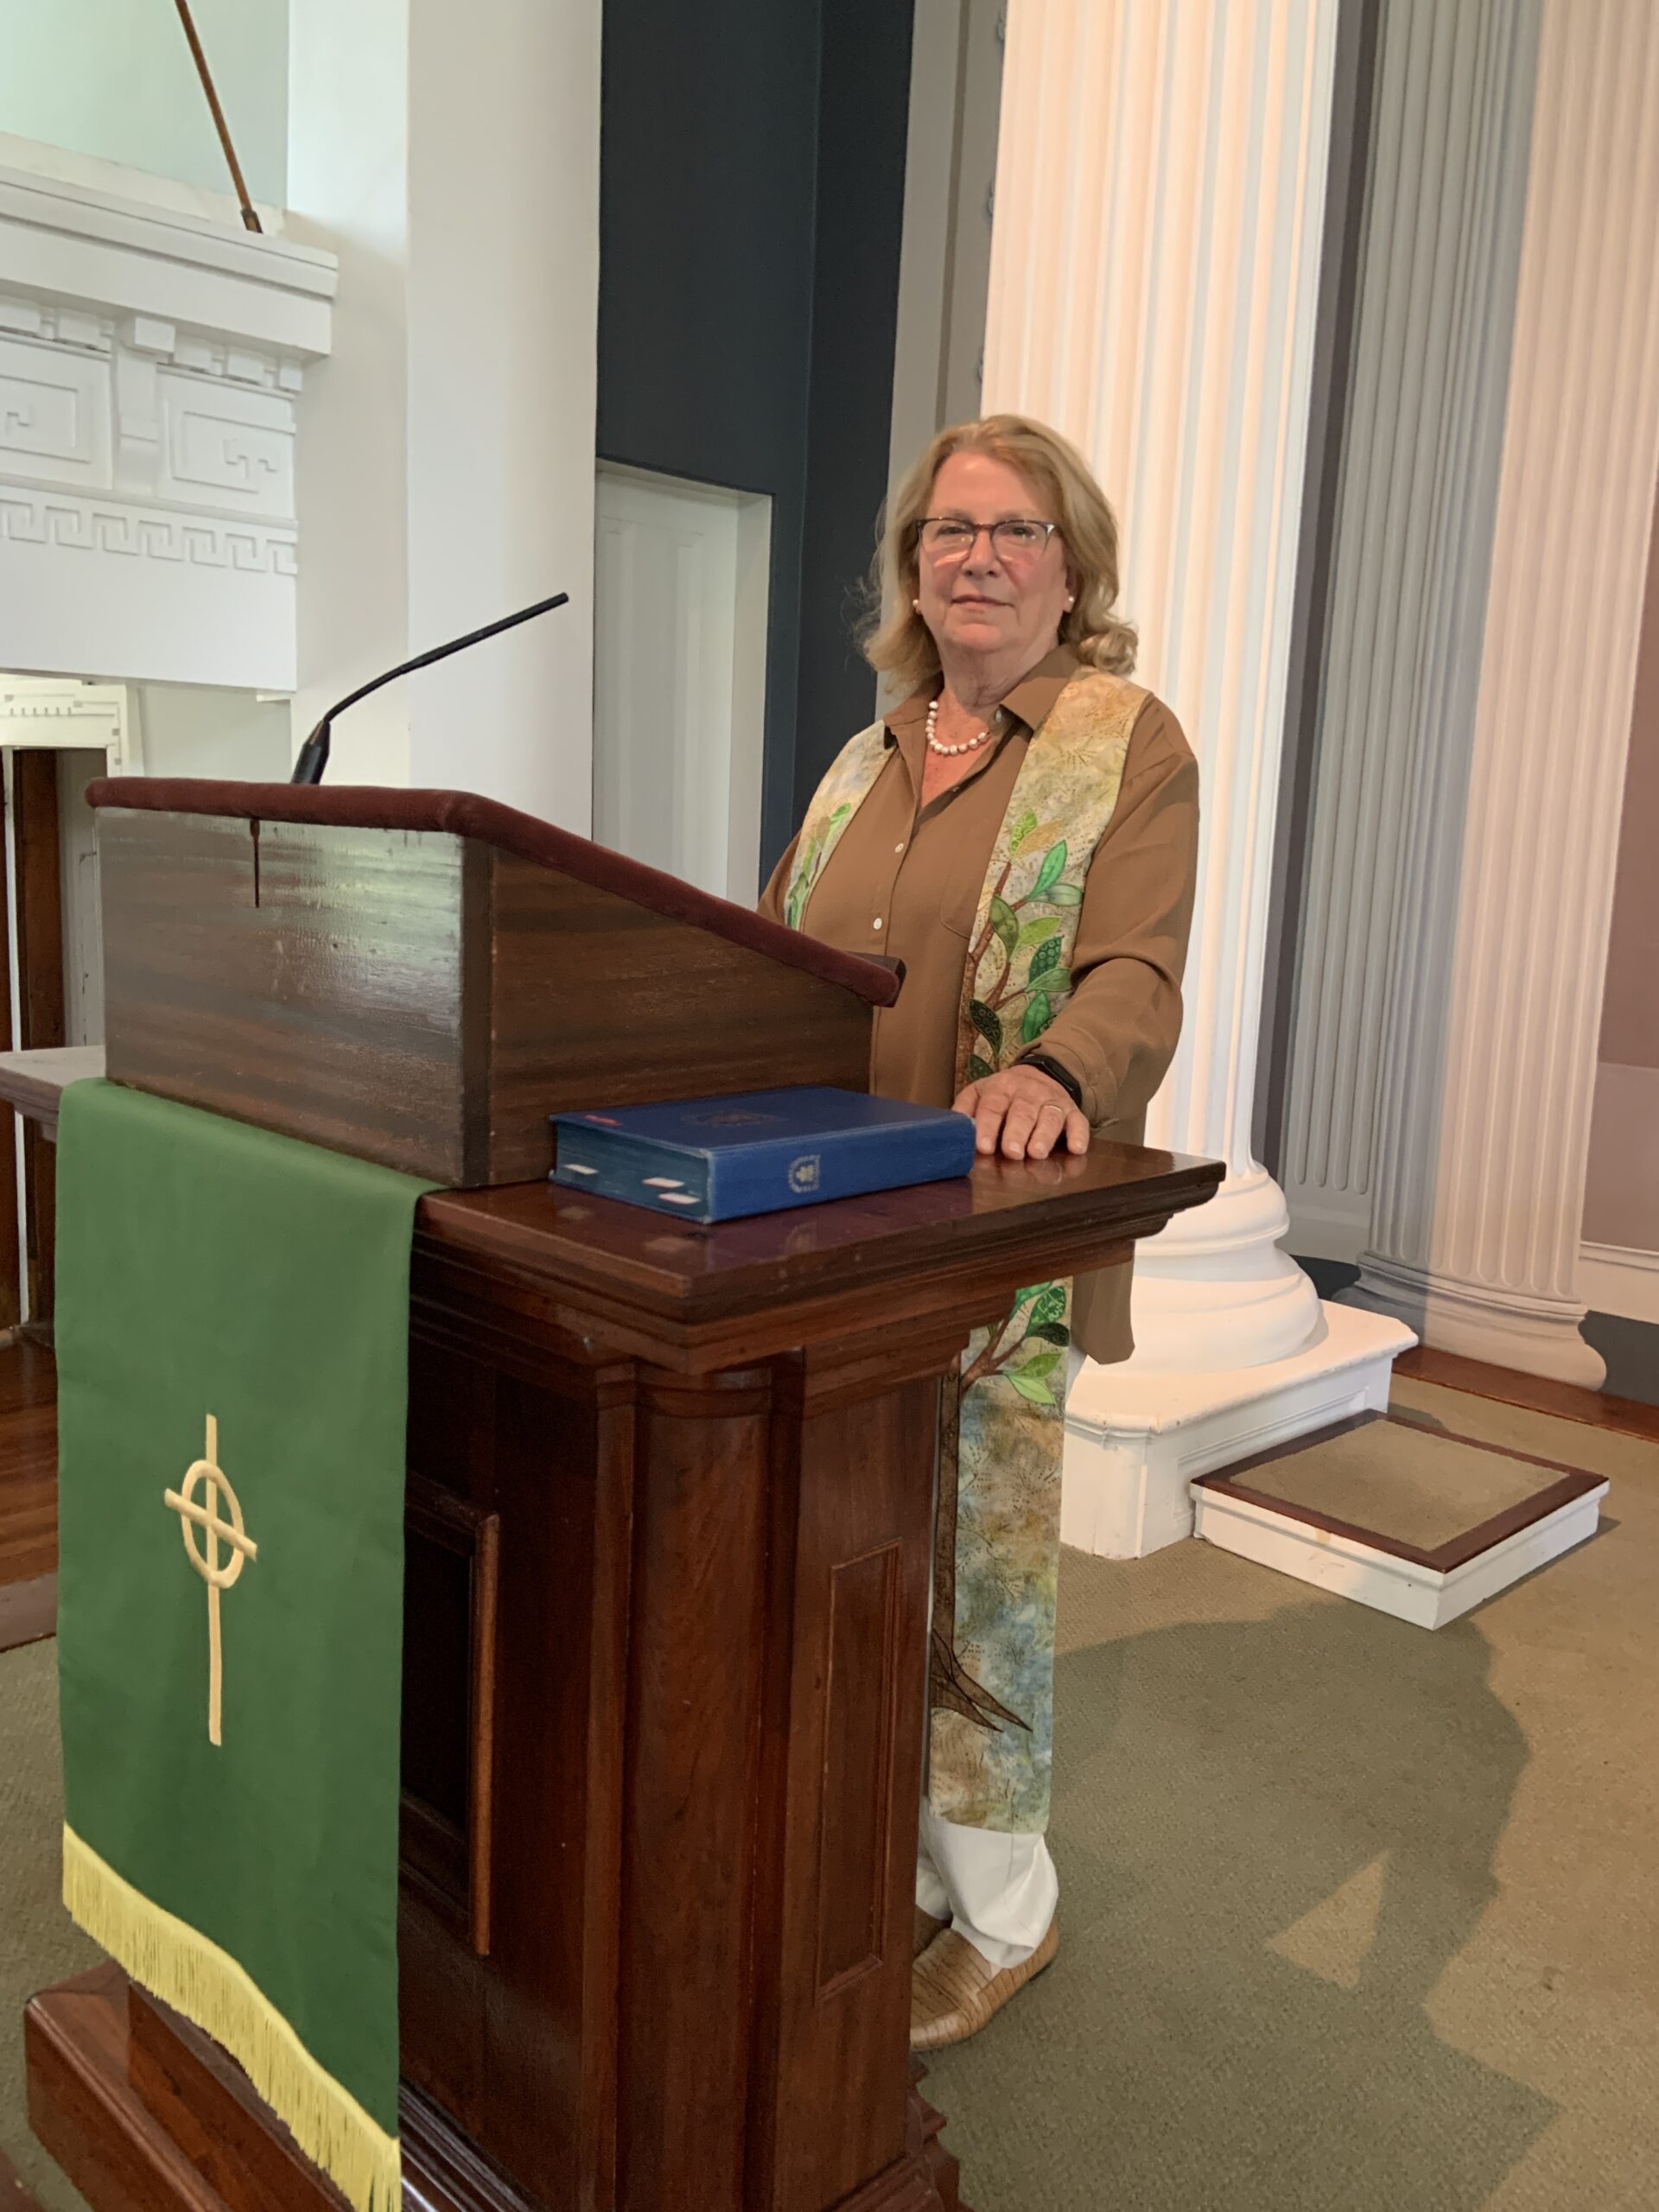 Nancy Remkus, an interfaith minister, has been named pastor of the Old Whalers' Church in Sag Harbor. STEPHEN J. KOTZ